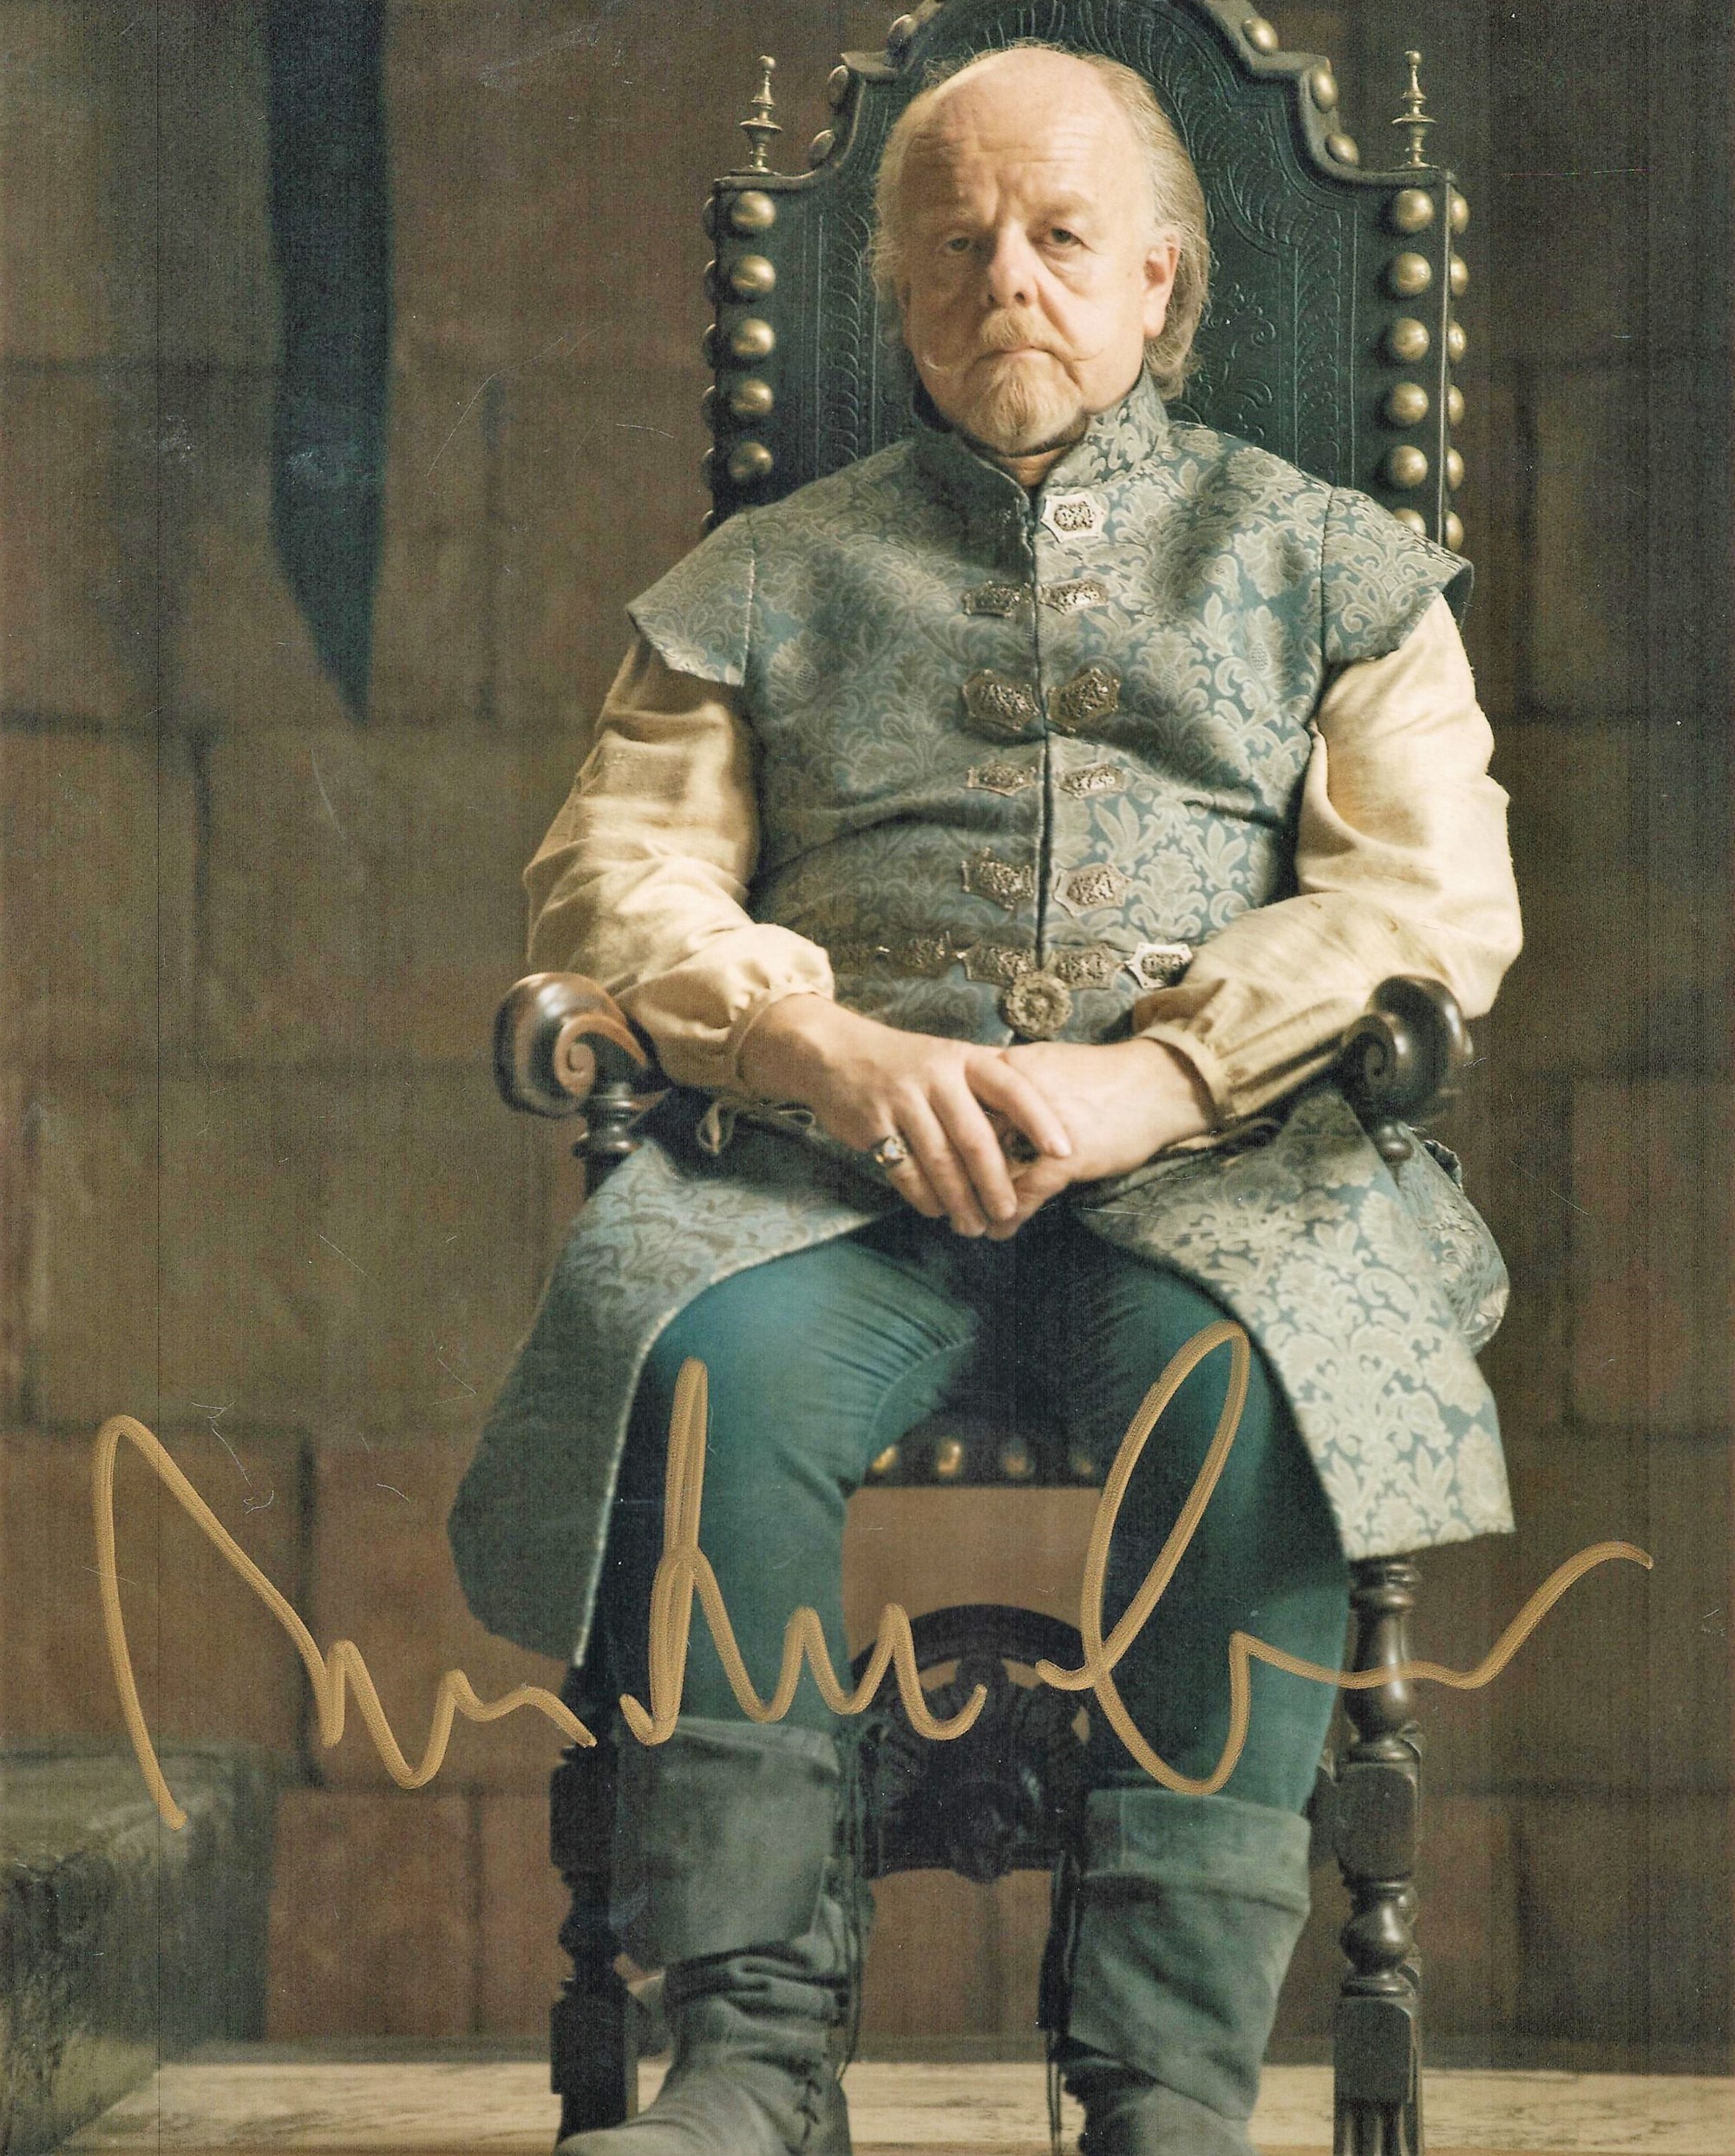 Roger Ashton Griffiths signed 10x8 colour photo. Good condition. All autographs come with a